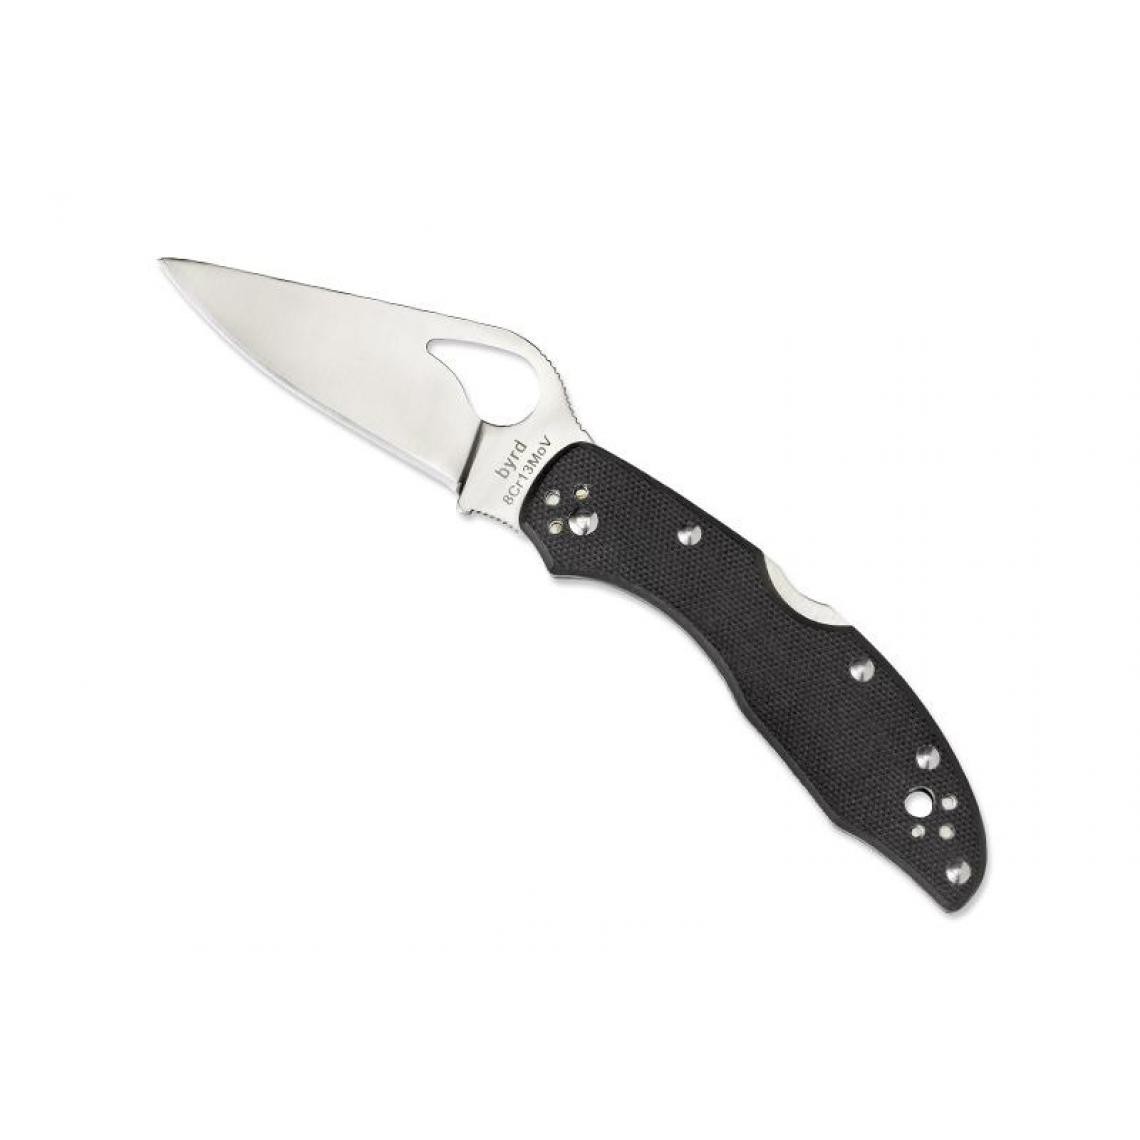 Divers Marques - BYRD KNIFE - BY04GP2 - COUTEAU BYRD MEADOWLARK 2 G10 - Outils de coupe